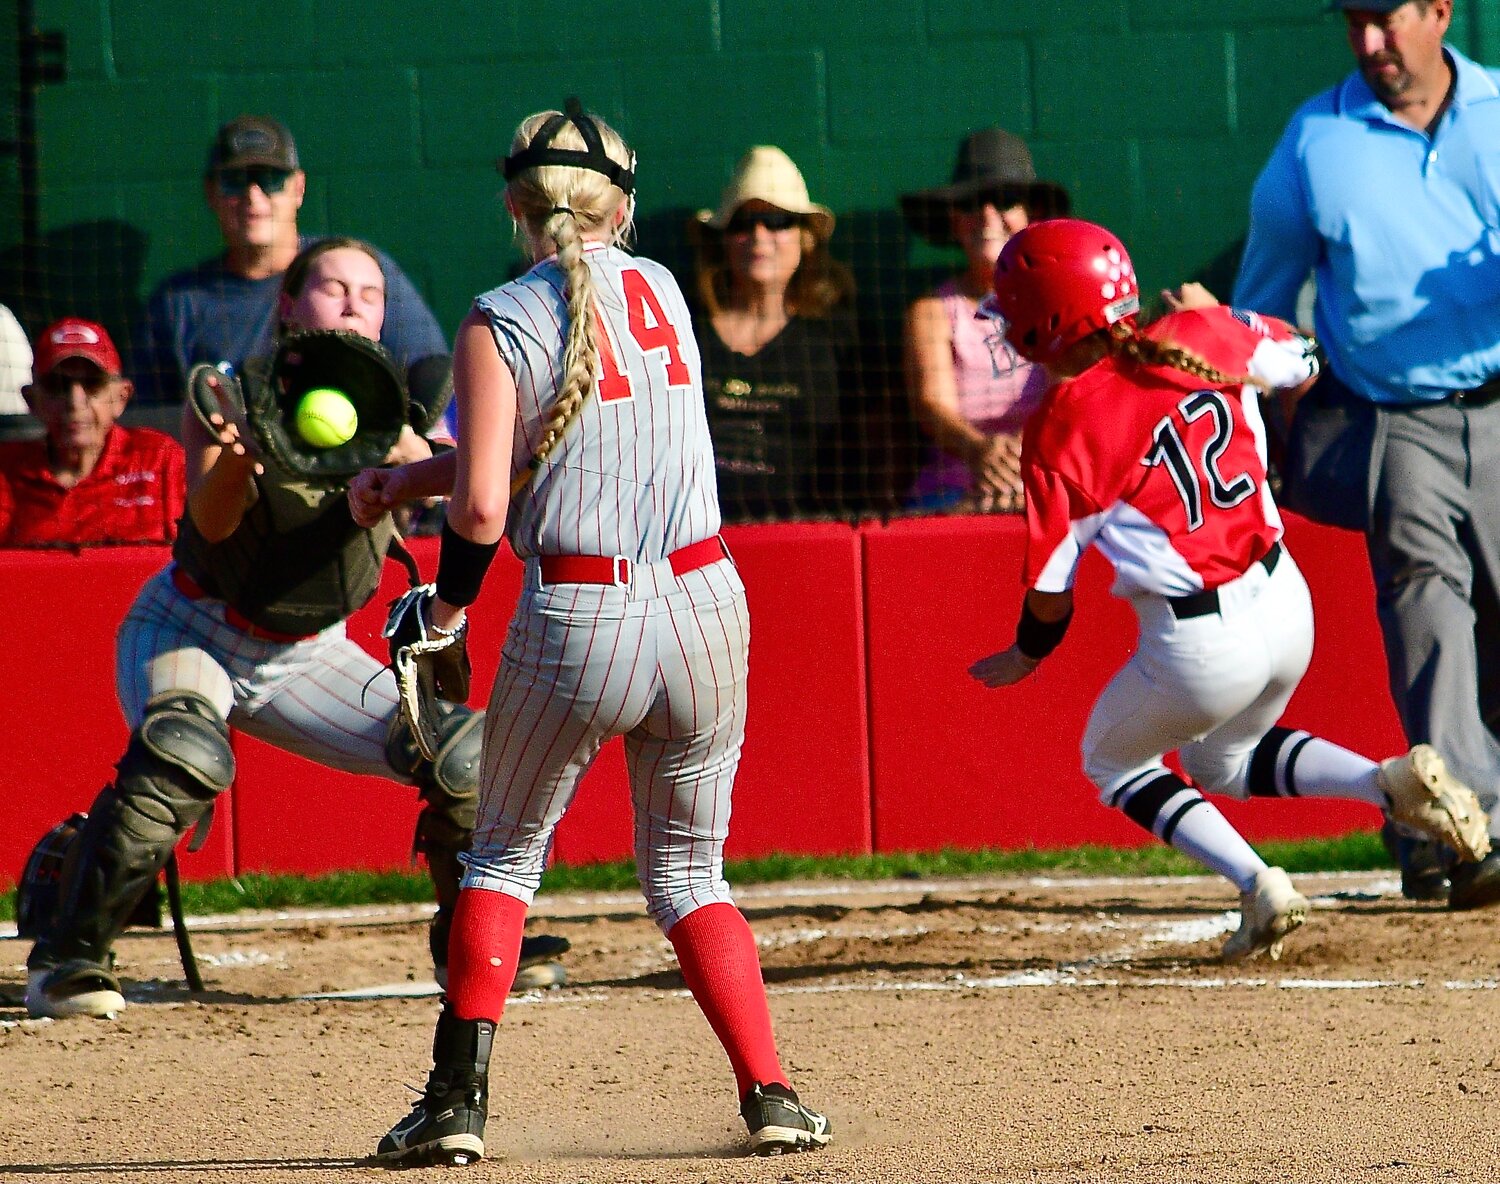 OZARK'S KENDALL MCCOY tries to beat a throw home from the Carl Junction pitcher, after a squeeze bunt. She was tagged out.